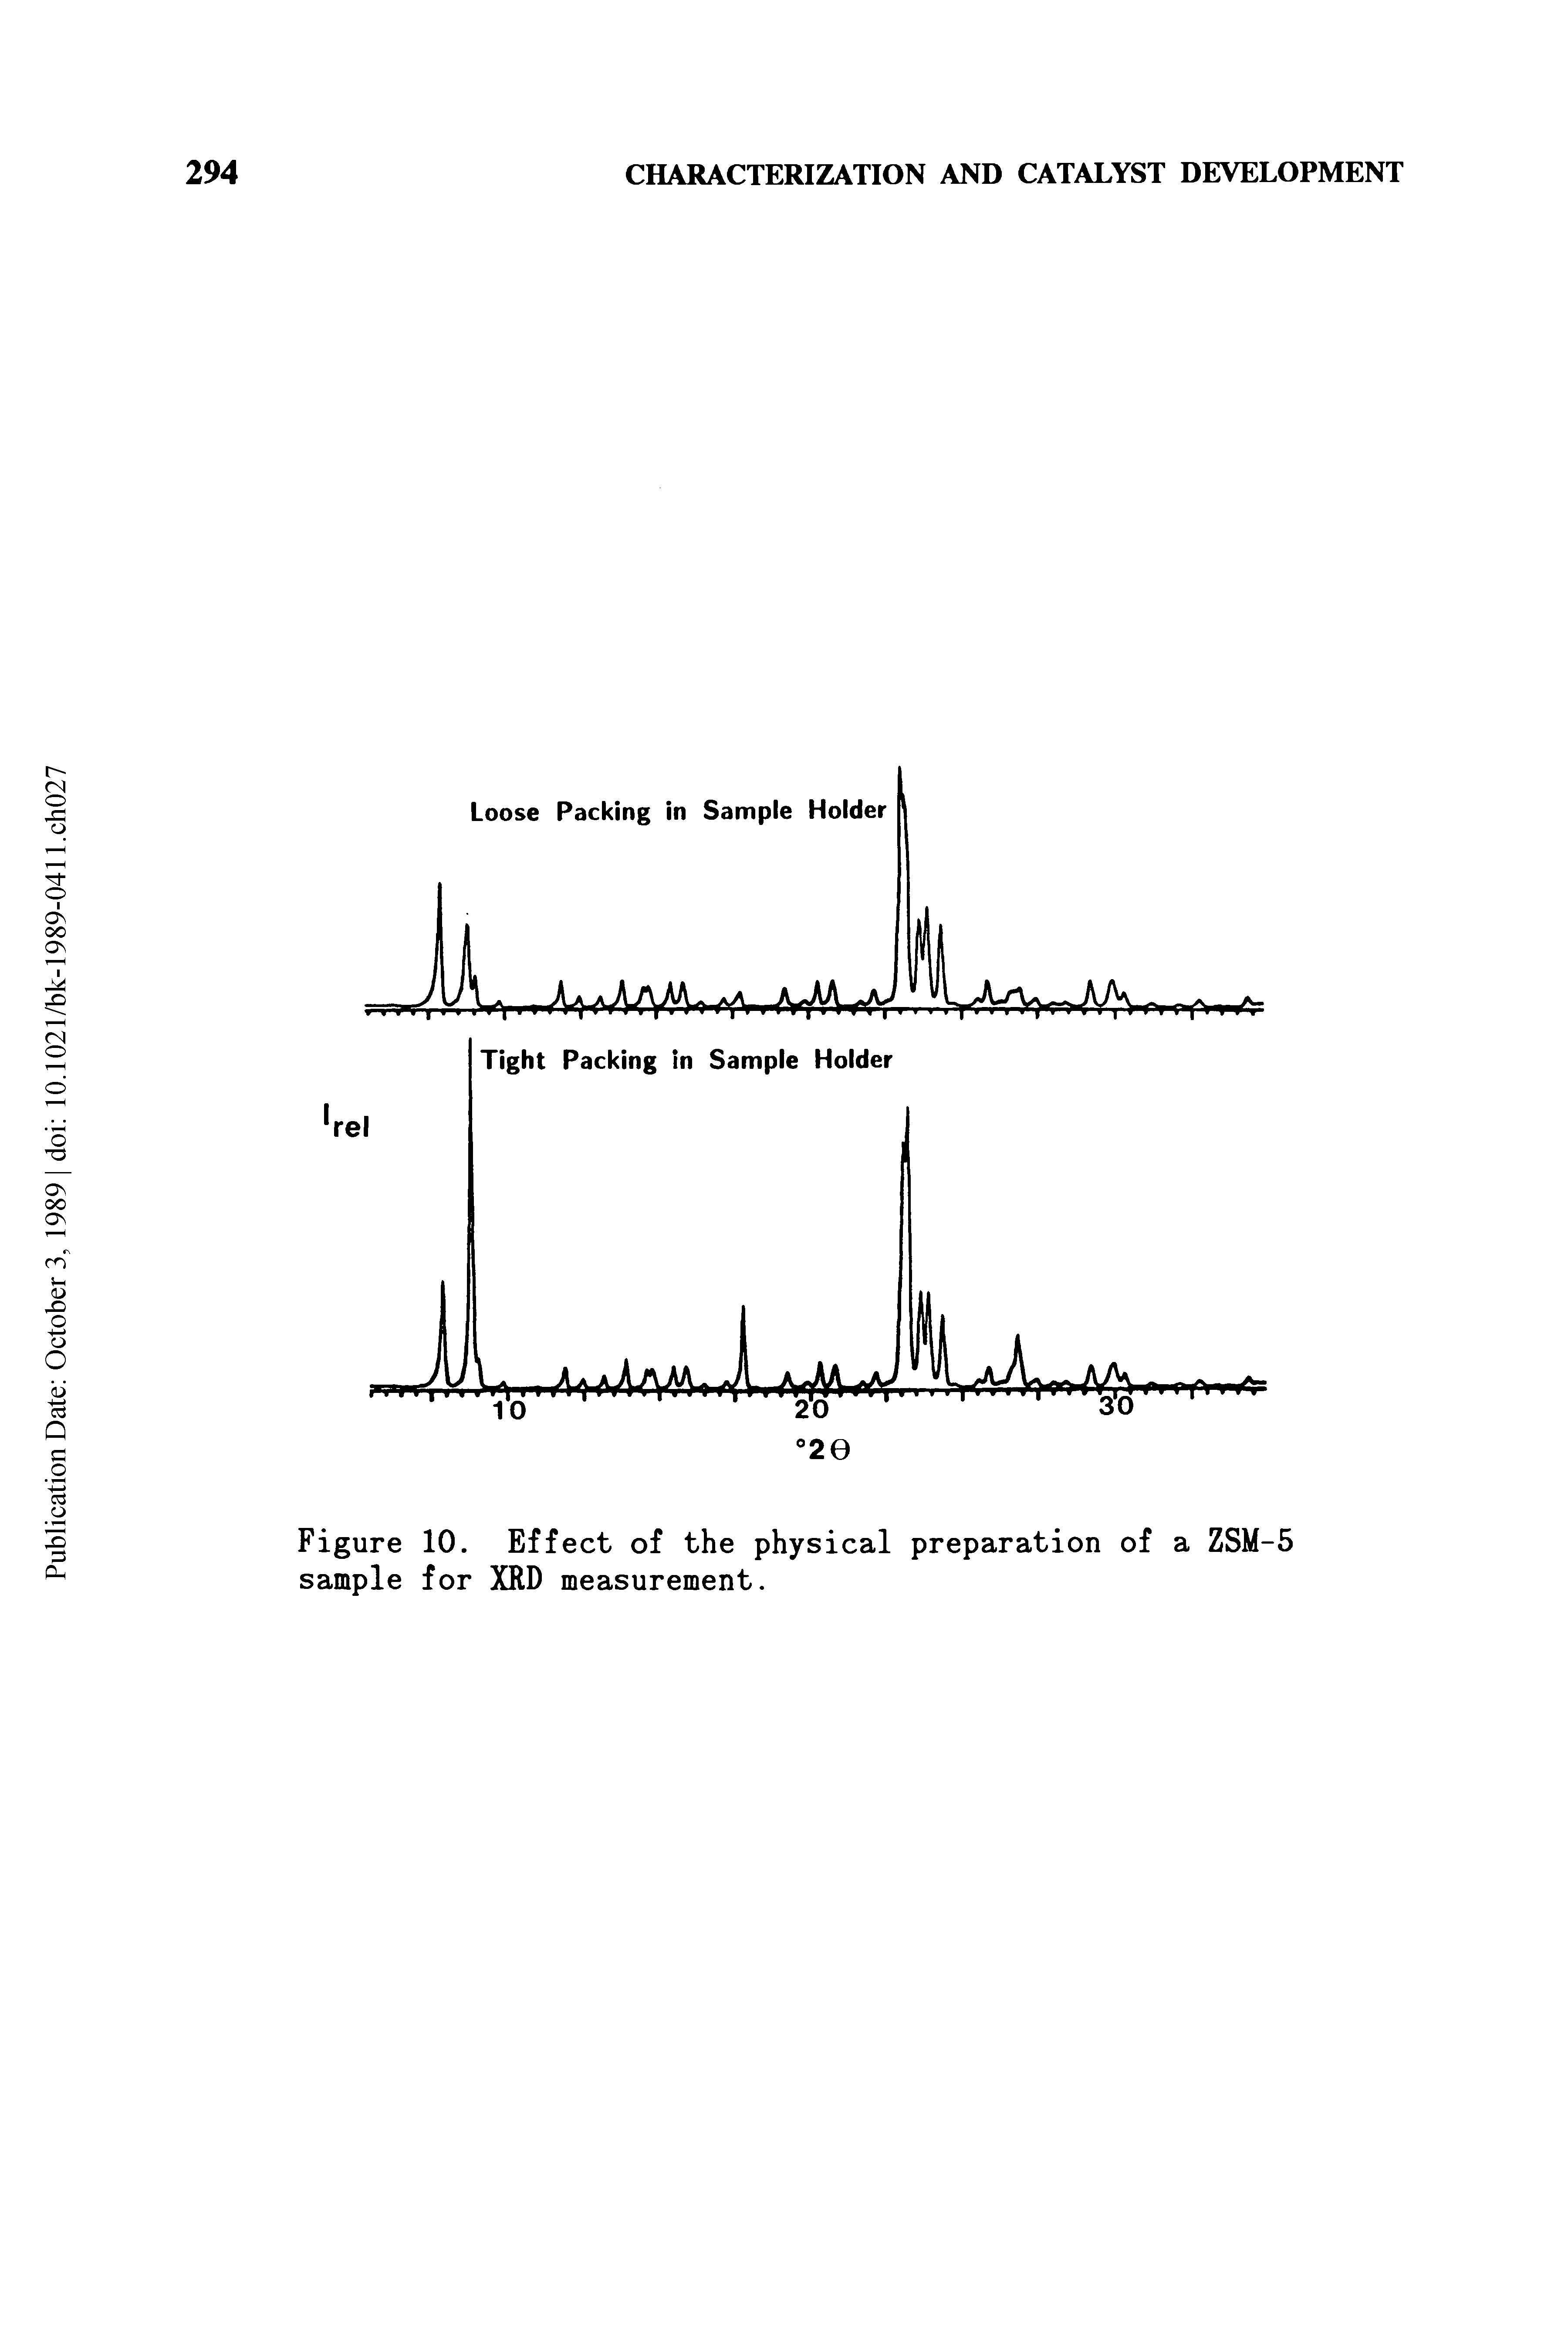 Figure 10. Effect of the physical preparation of a ZSM-5 sample for XRD measurement.